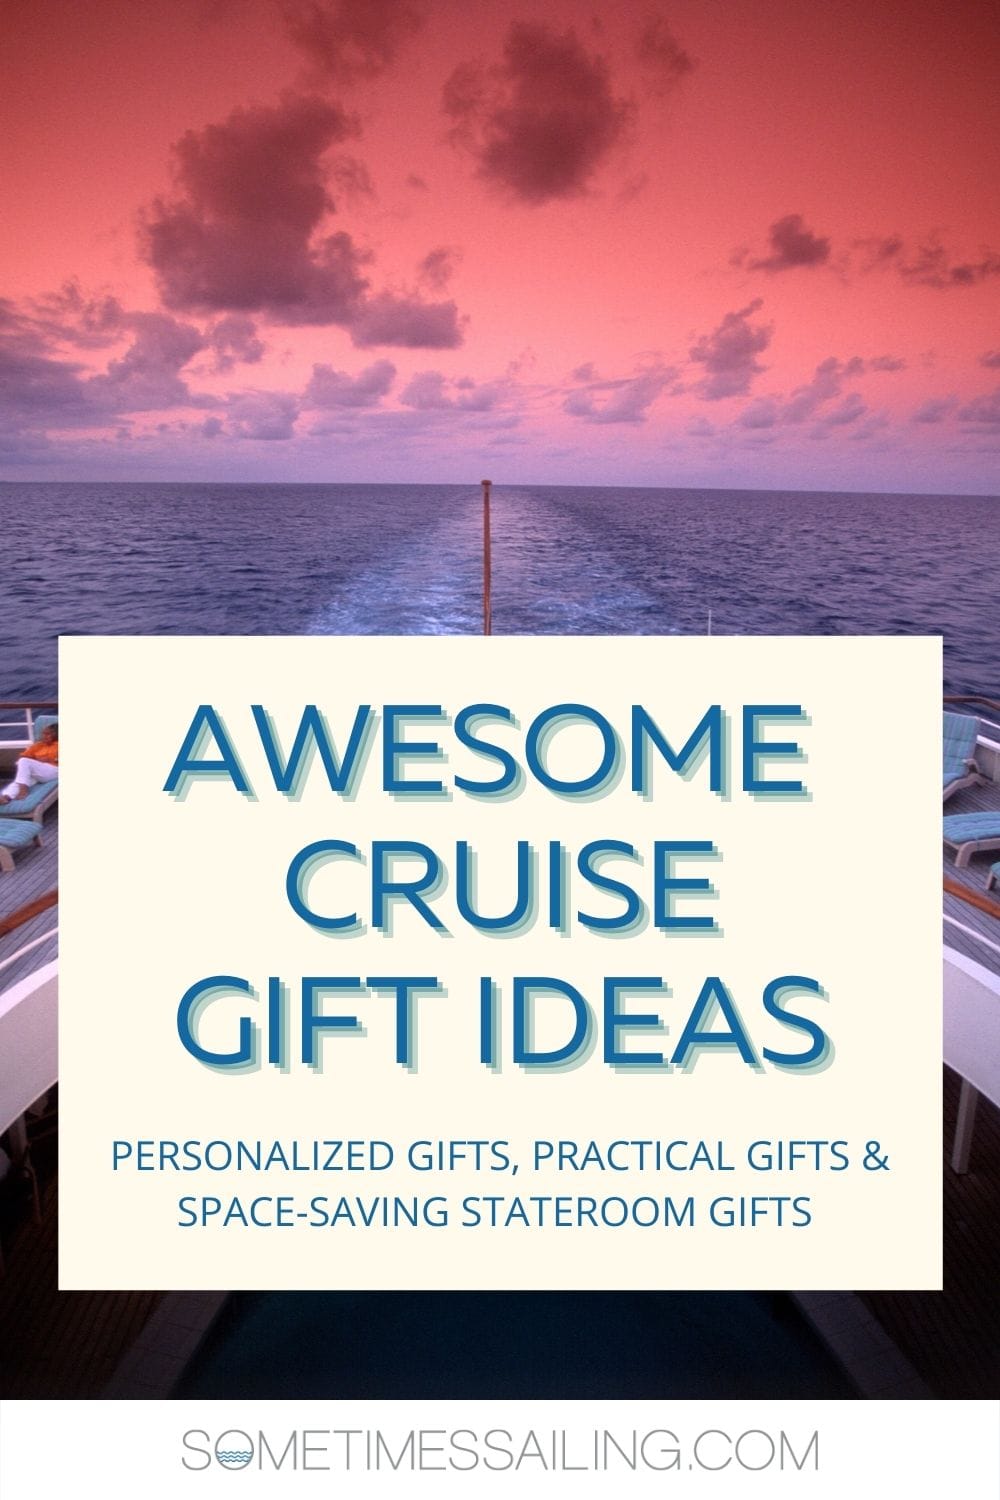 Cruise gift ideas Pinterest image with a blue block and text and photo of a pink and purple sunset above a cruise ship